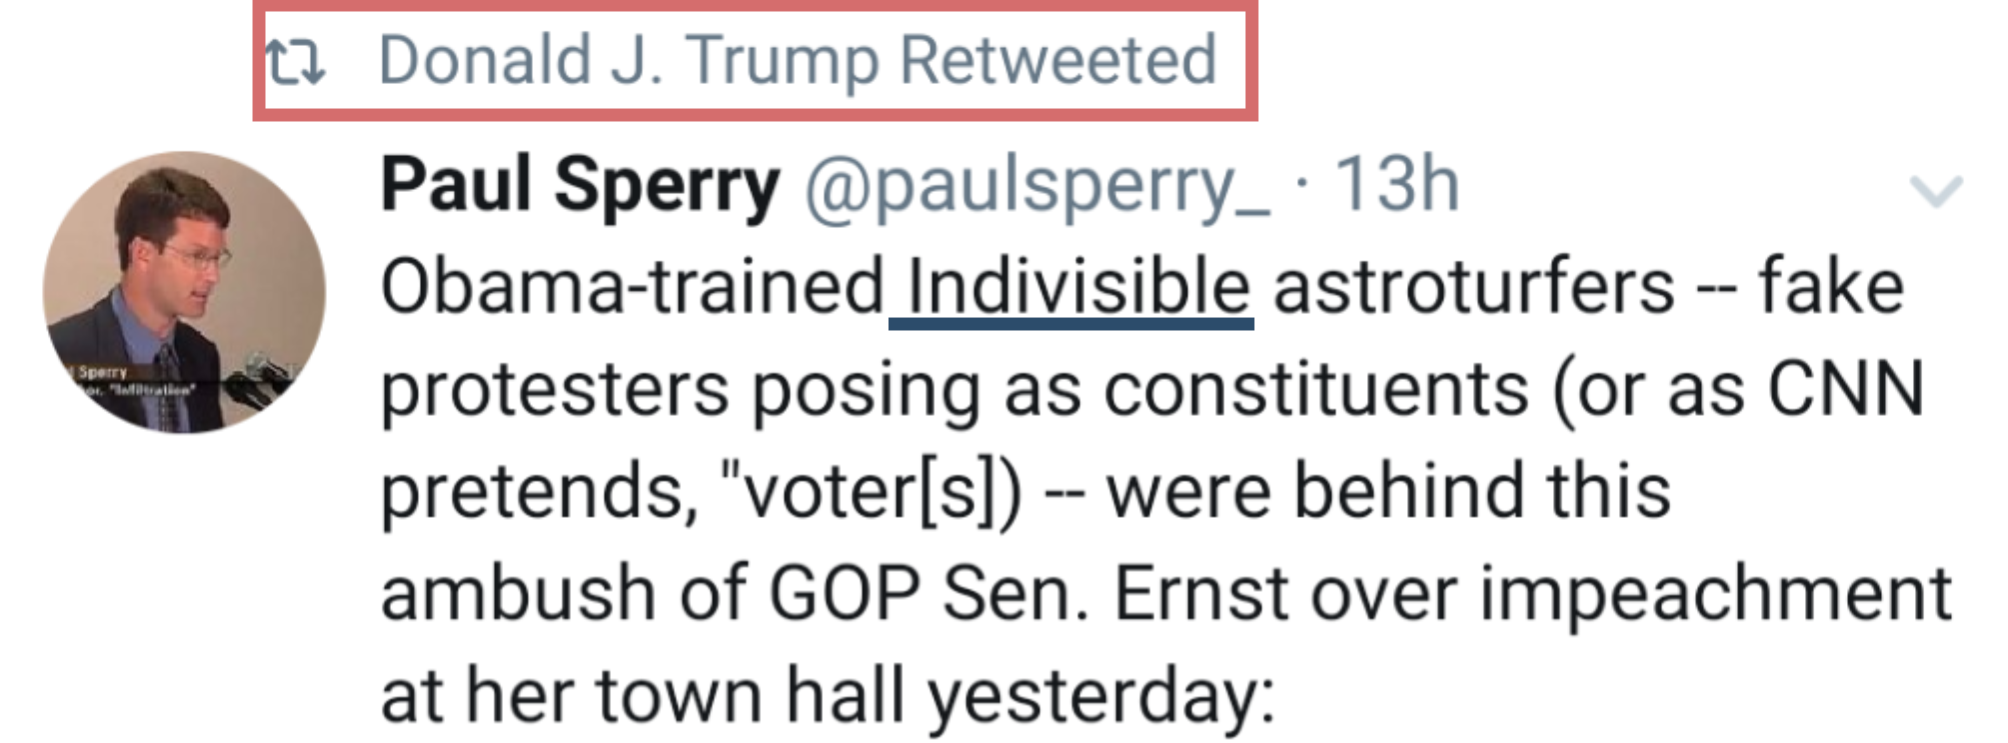 A screenshot of @RealDonaldTrump retweeting a tweet that reads "Obama-trained Indivisible astroturfers -- fake protesters posing as constituents (or as CNN pretends, "voter[s]) -- were behind this ambush of GOP Sen. Ernst over impeachment at her town hall yesterday"